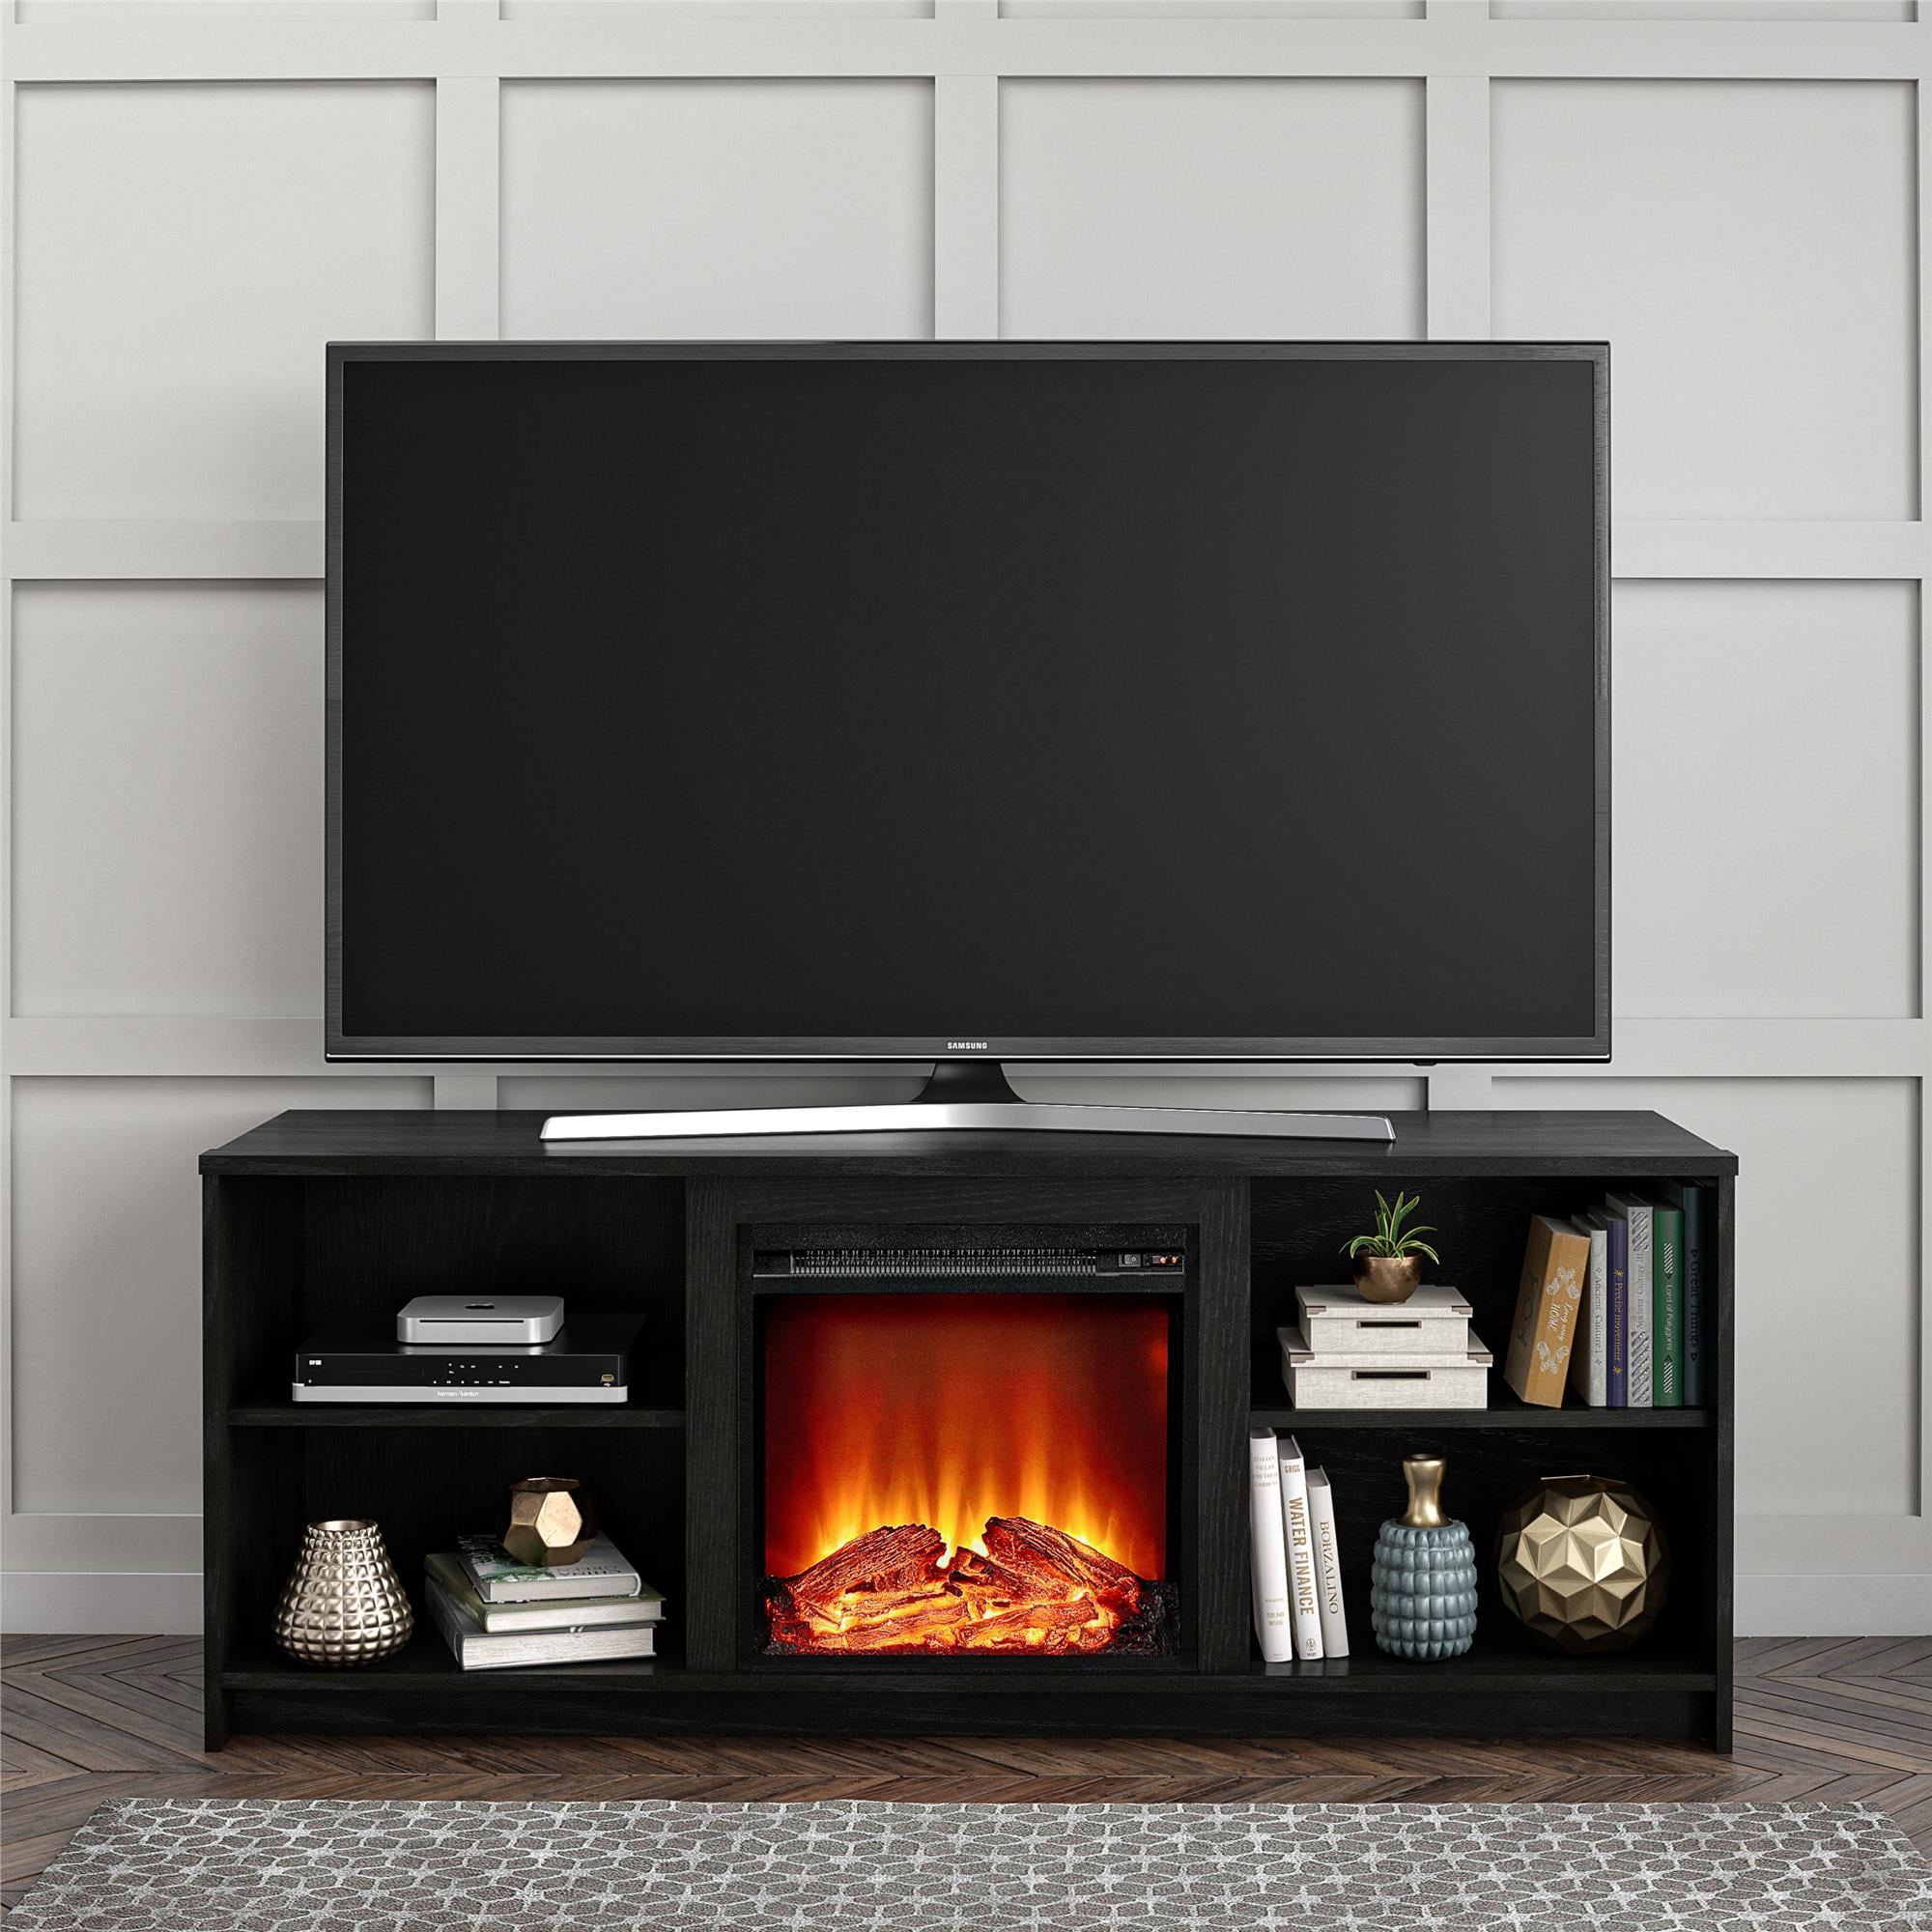 Mainstays Fireplace Tv Stand For Tvs Up, 65 Tv Stand With Built In Fireplace